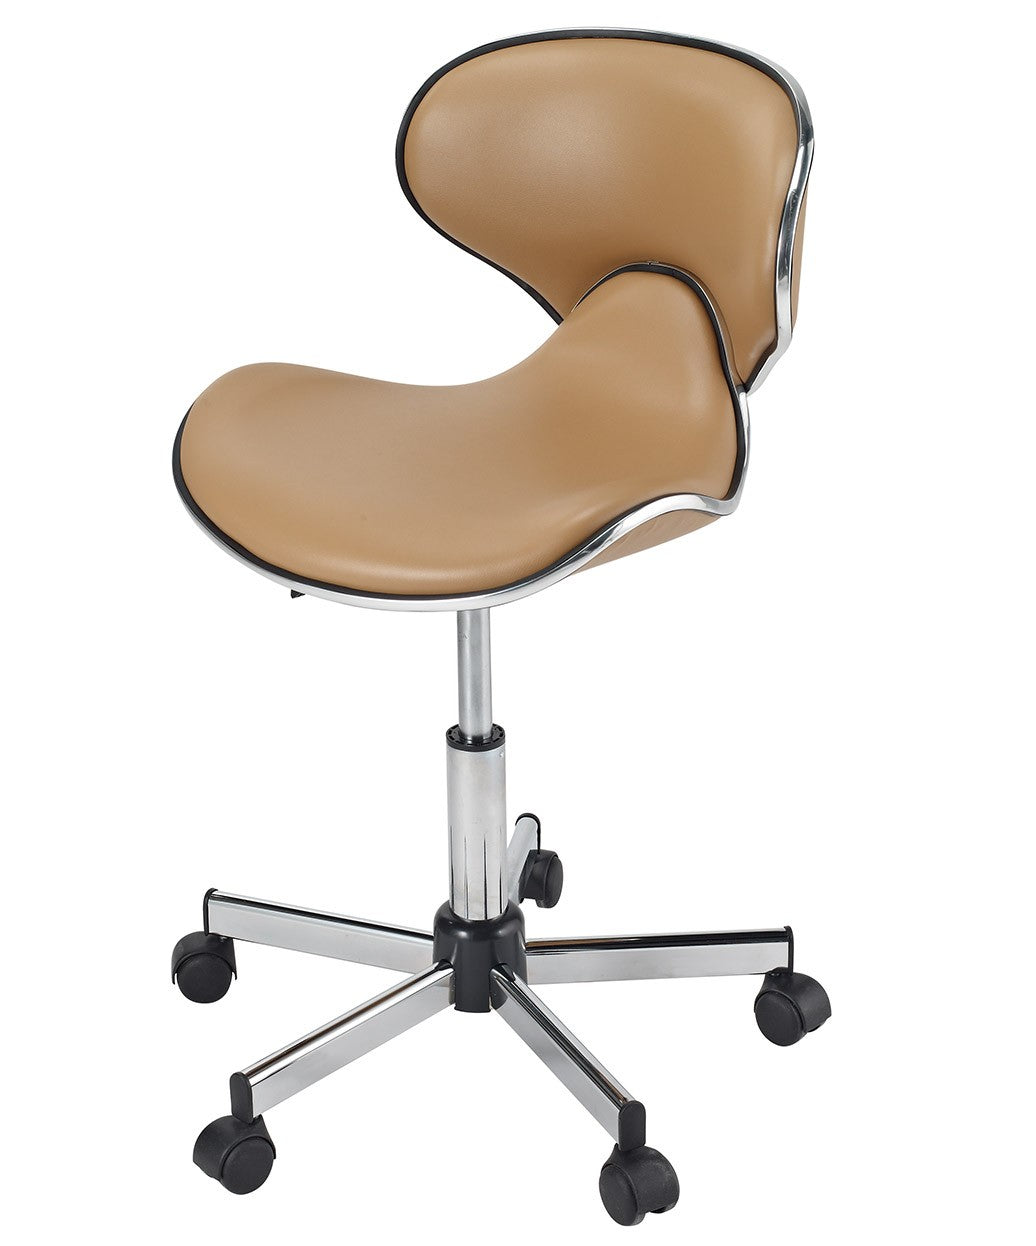 Pibbs 645 Mid Butterfly Stool with Backrest